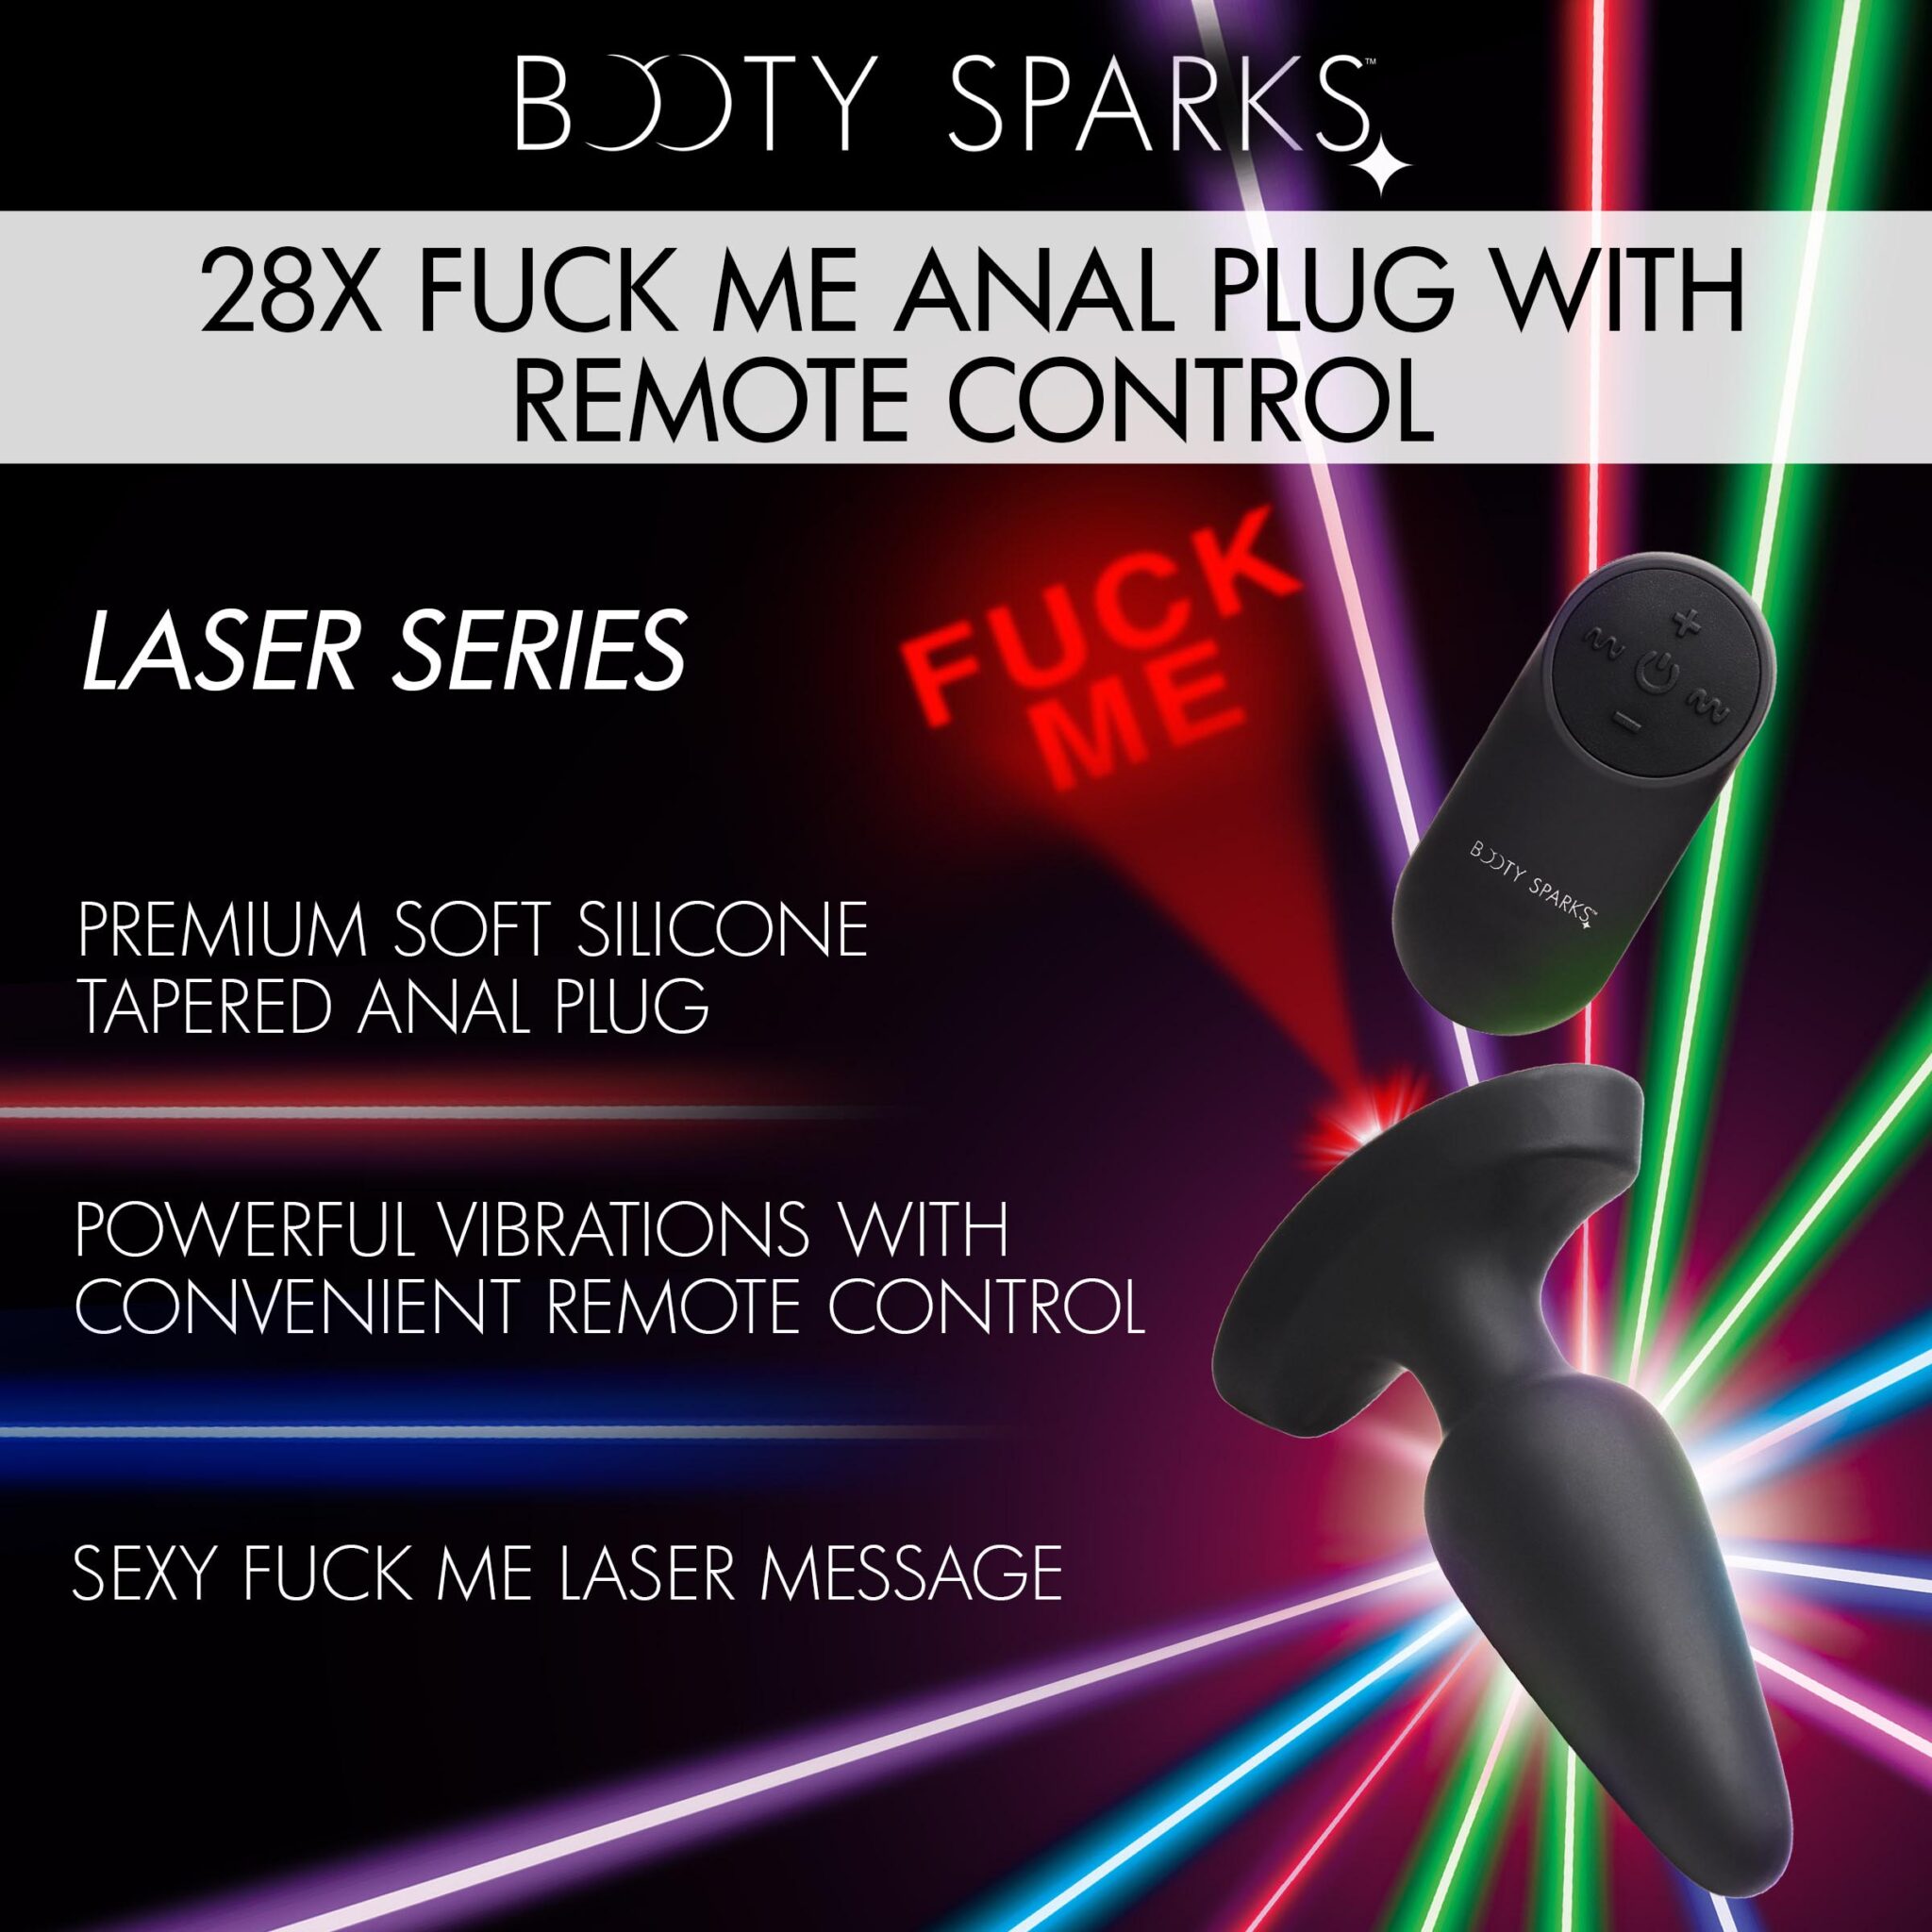 28X Laser Fuck Me Silicone Anal Plug with Remote Control - Large-7